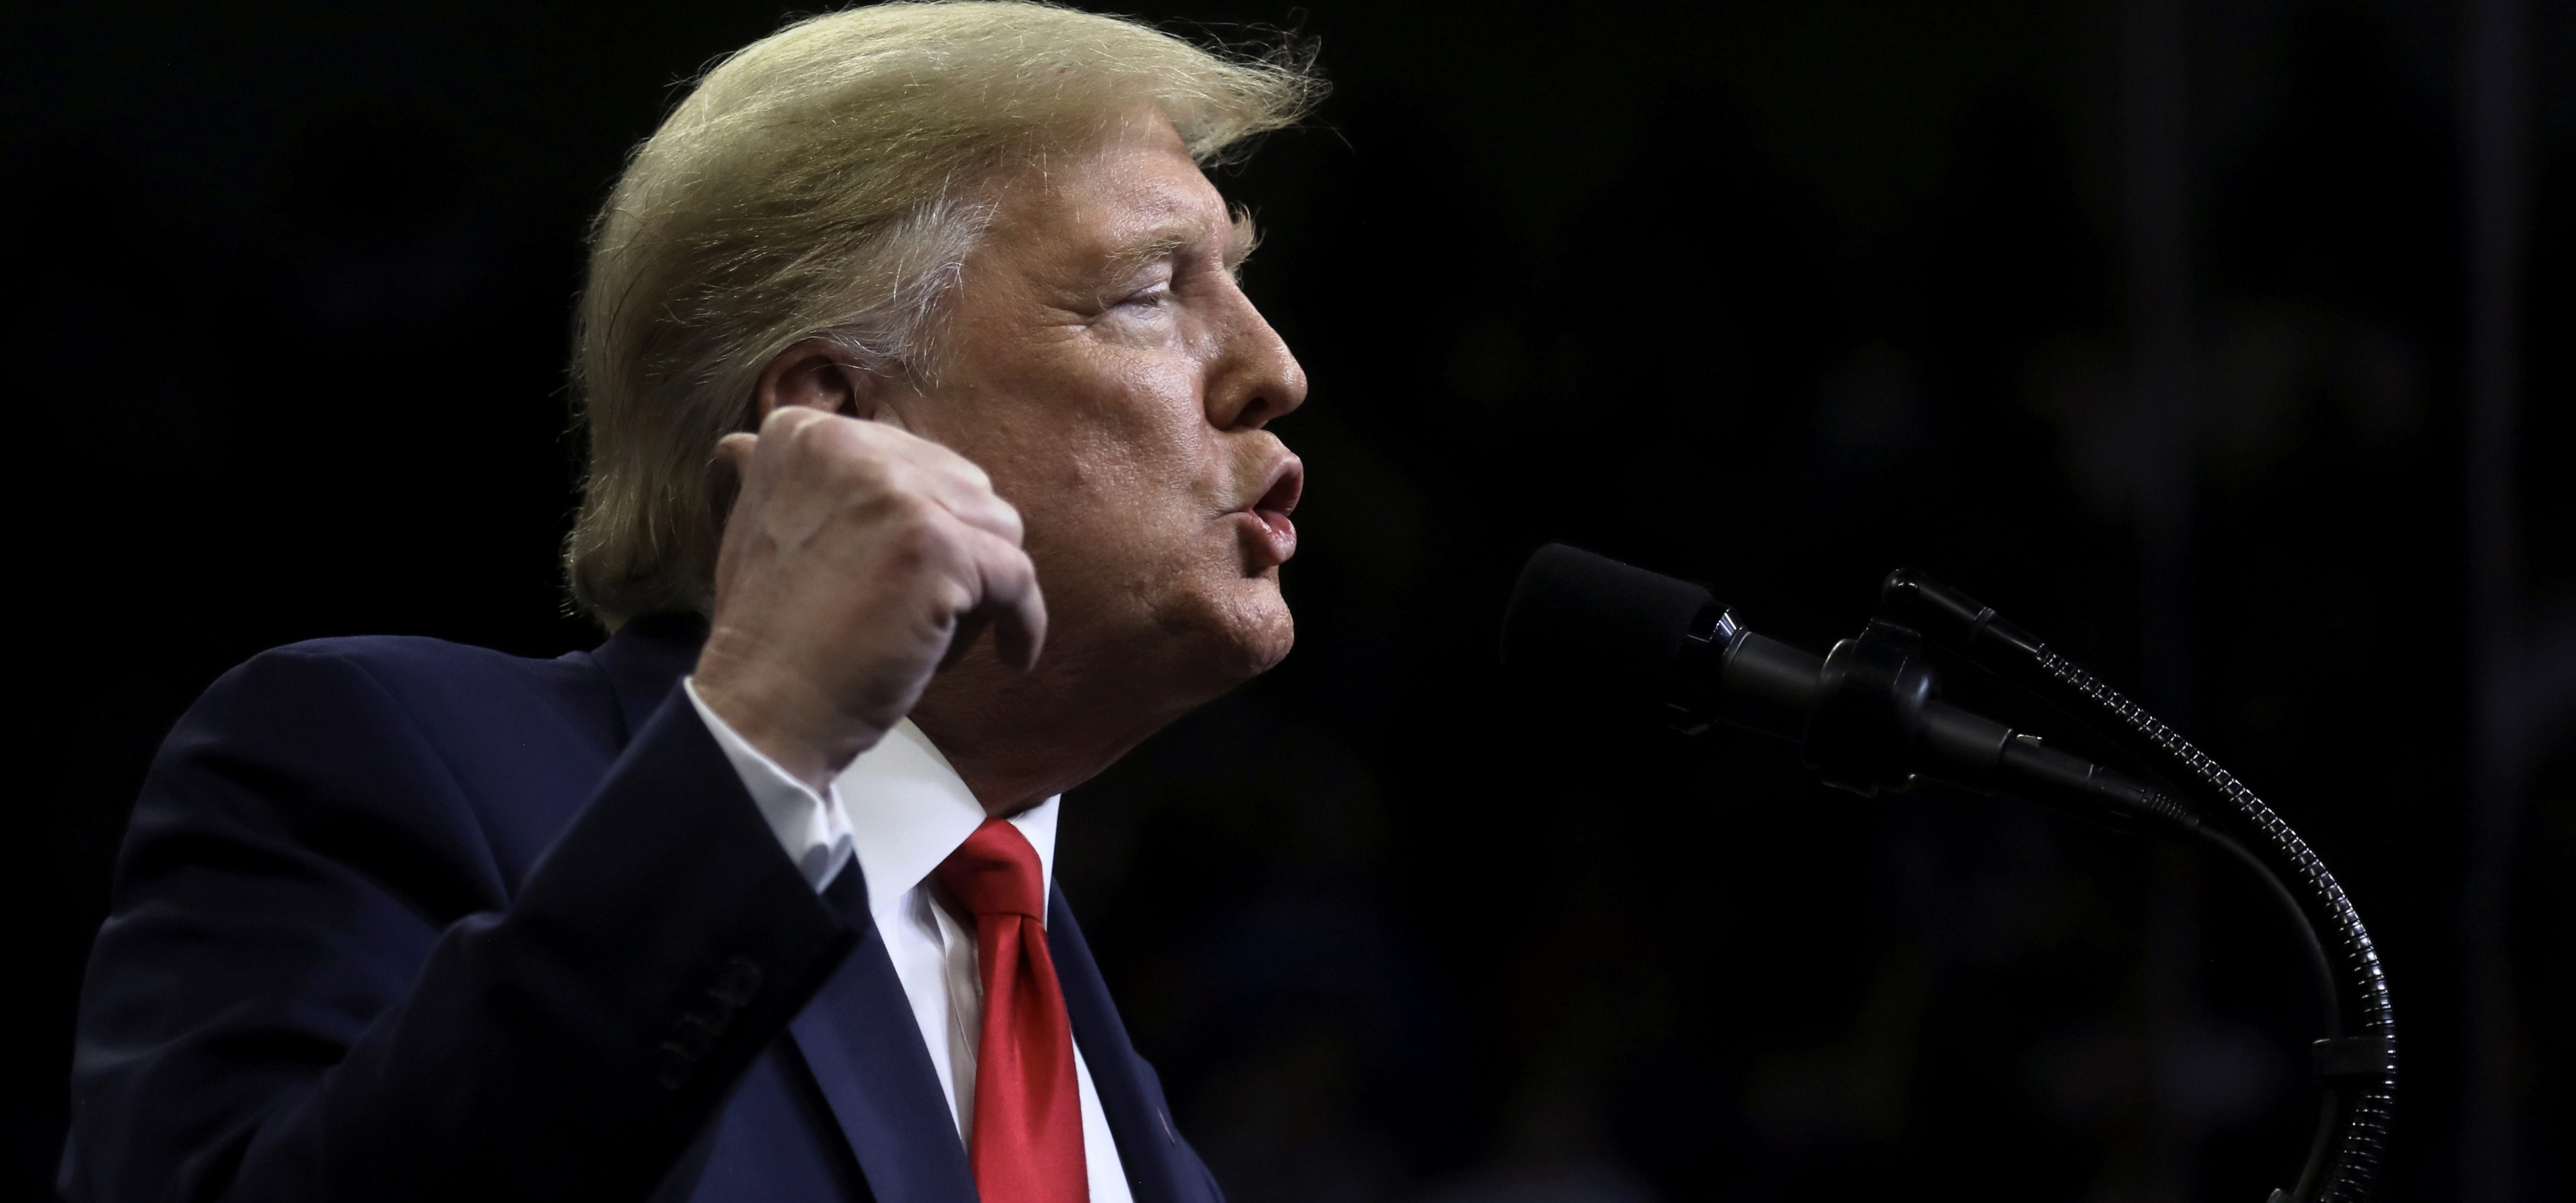 FILE PHOTO: U.S. President Donald Trump speaks during a campaign rally at Drake University in Des Moines, Iowa, U.S., Jan. 30, 2020. REUTERS/Leah Millis/File Photo